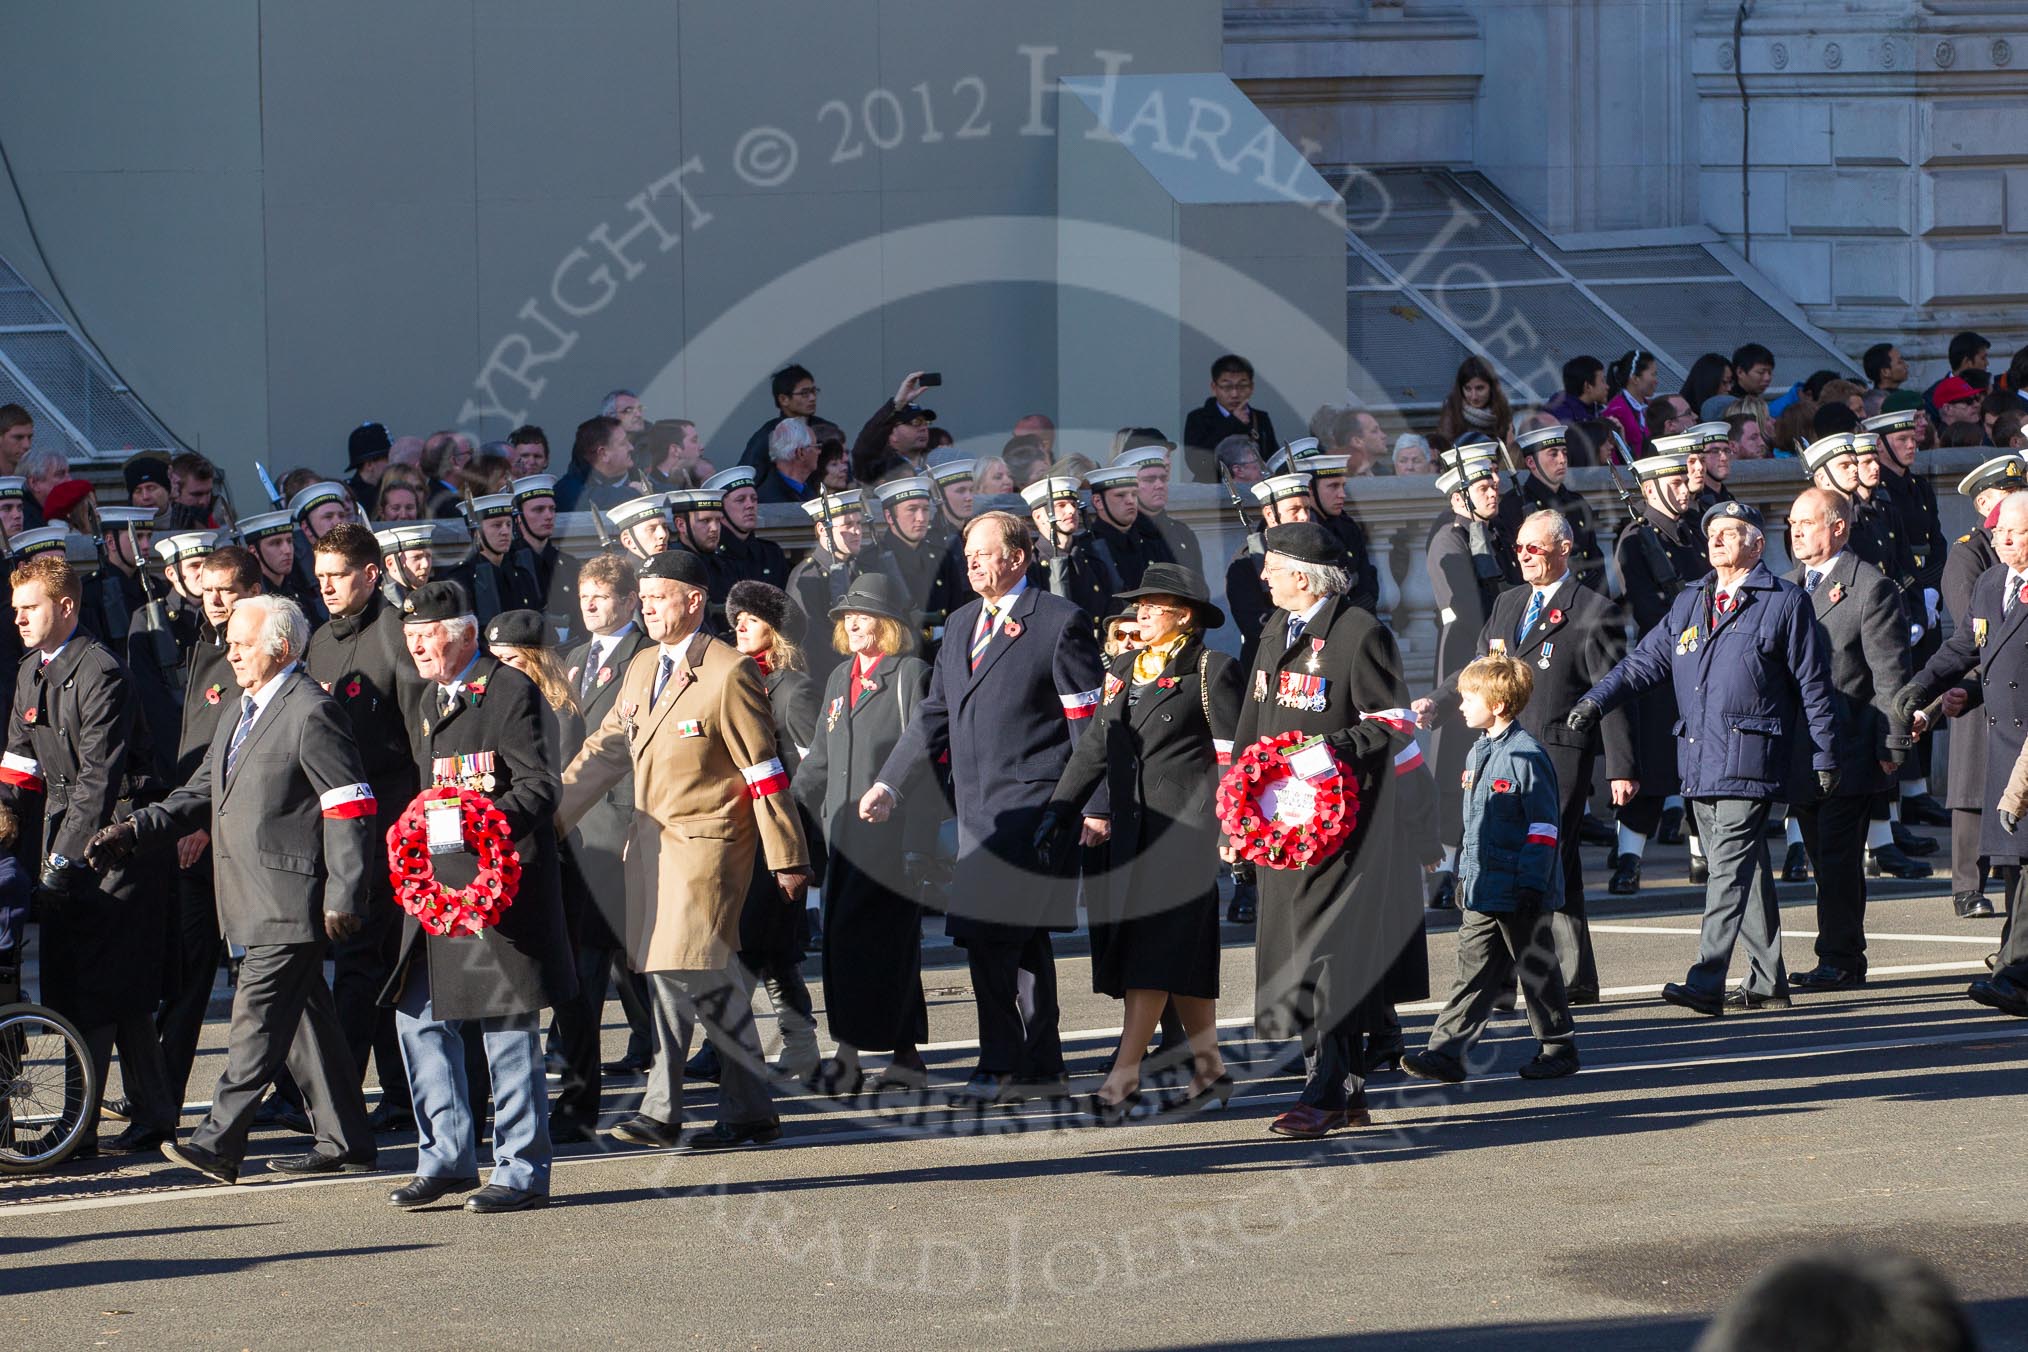 Remembrance Sunday 2012 Cenotaph March Past: Group D11 - Polish Ex-Combatants Association in Great Britain and D12 - Canadian Veterans Association..
Whitehall, Cenotaph,
London SW1,

United Kingdom,
on 11 November 2012 at 12:07, image #1316